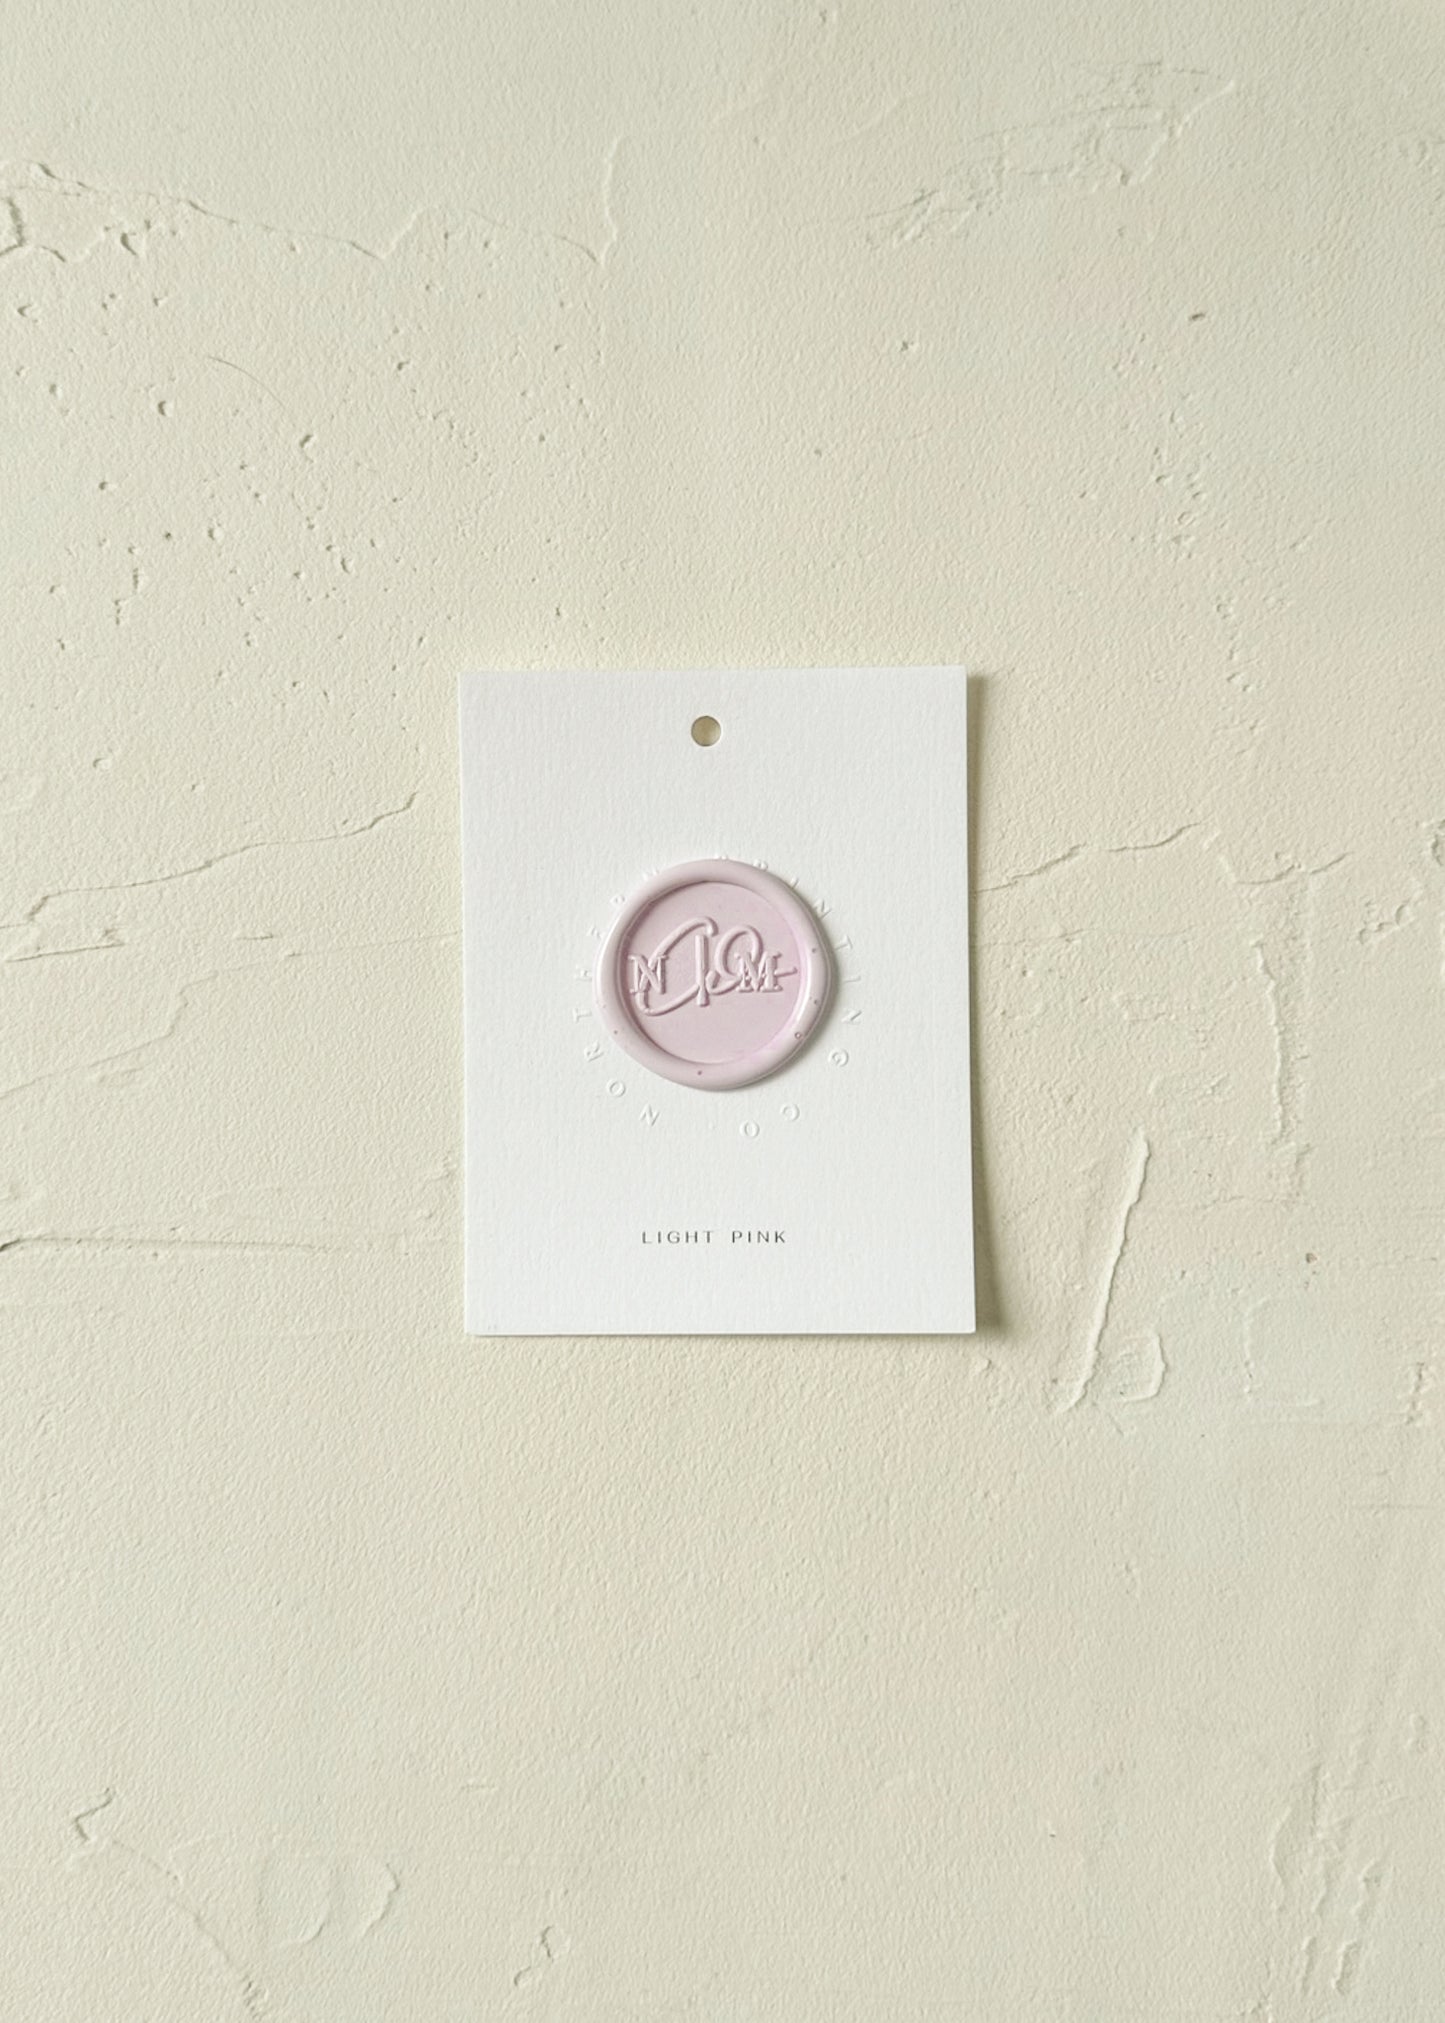 Elevated view of Light Pink wax seal stamp sample on textured background